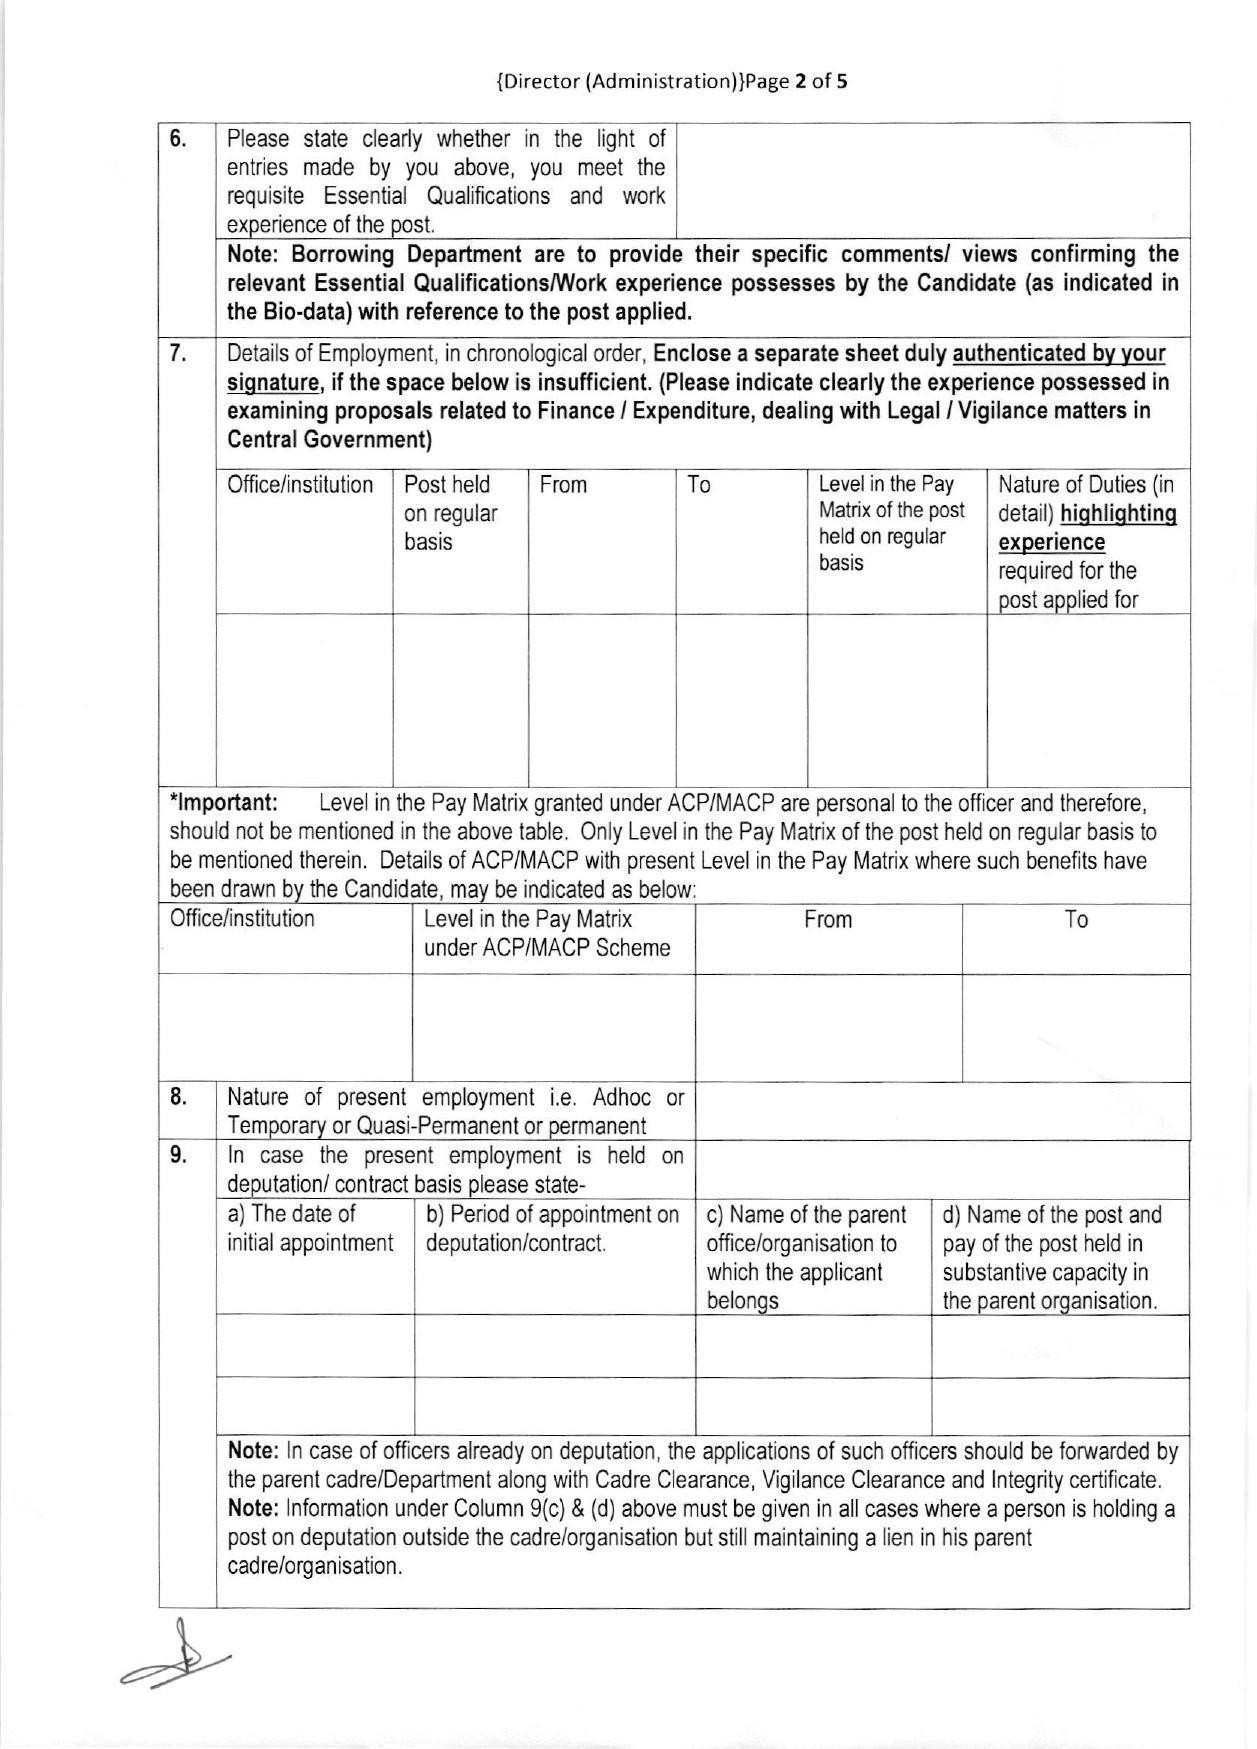 National Technical Research Organisation (NTRO) Invites Application for Director Recruitment 2022 - Page 5